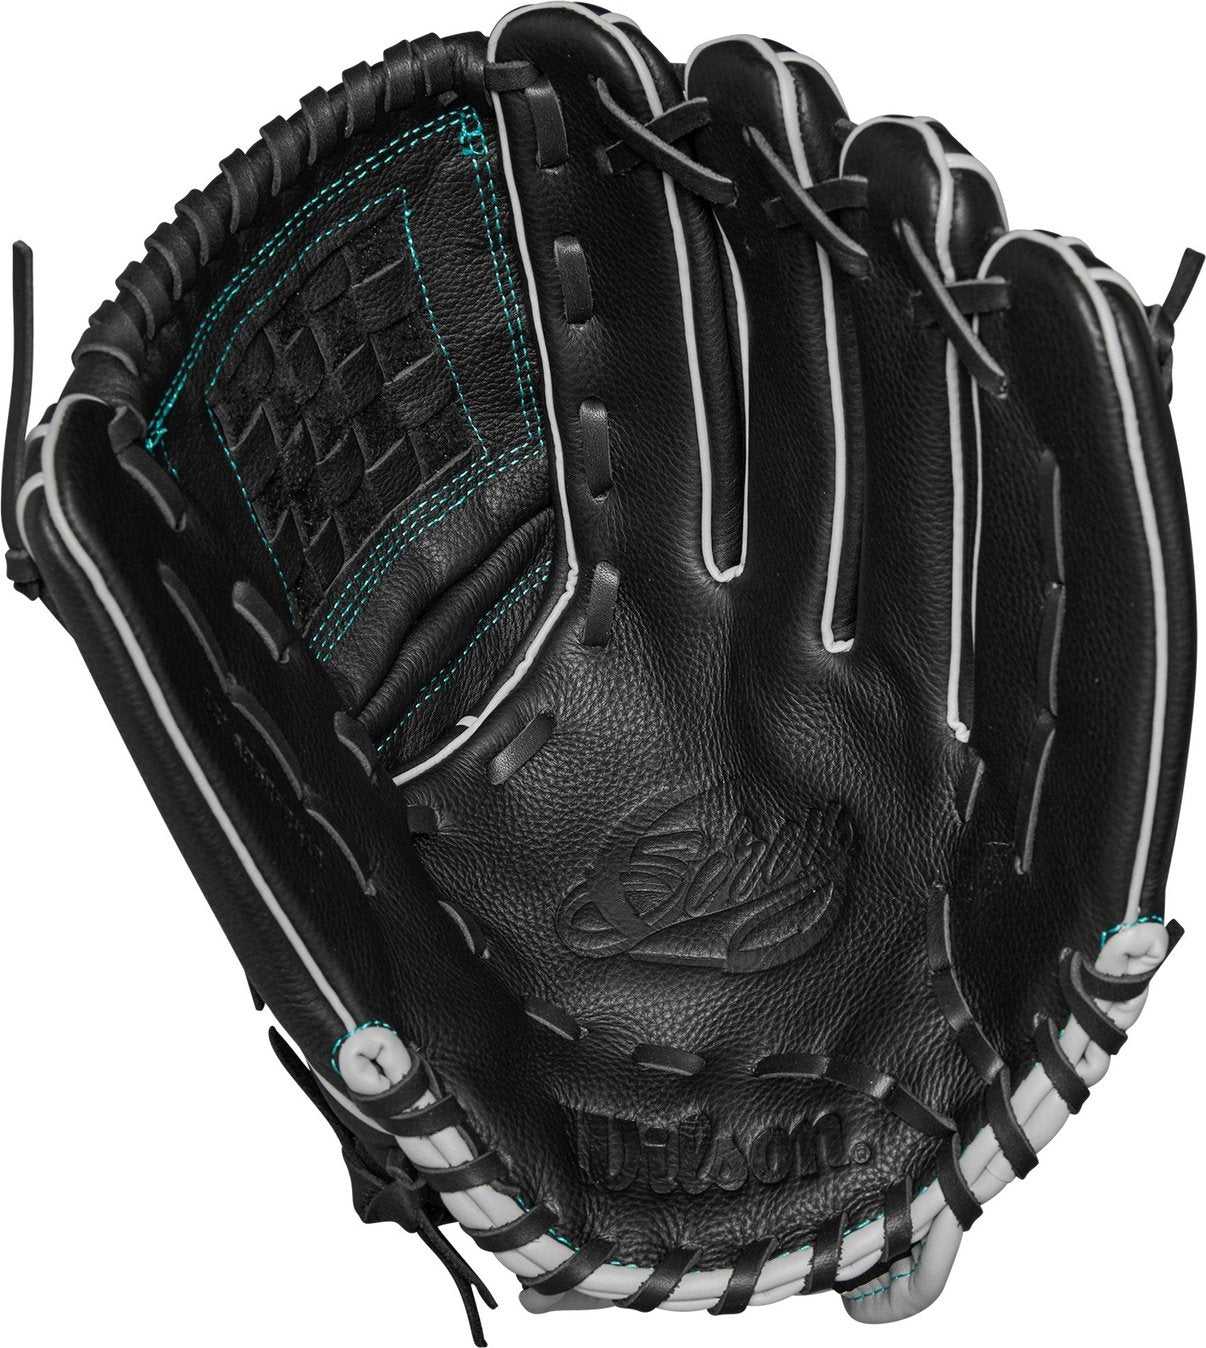 Wilson A500 Siren Youth Fastpitch 12.00" Infield Glove WBW10142012 - Black Teal - HIT a Double - 1